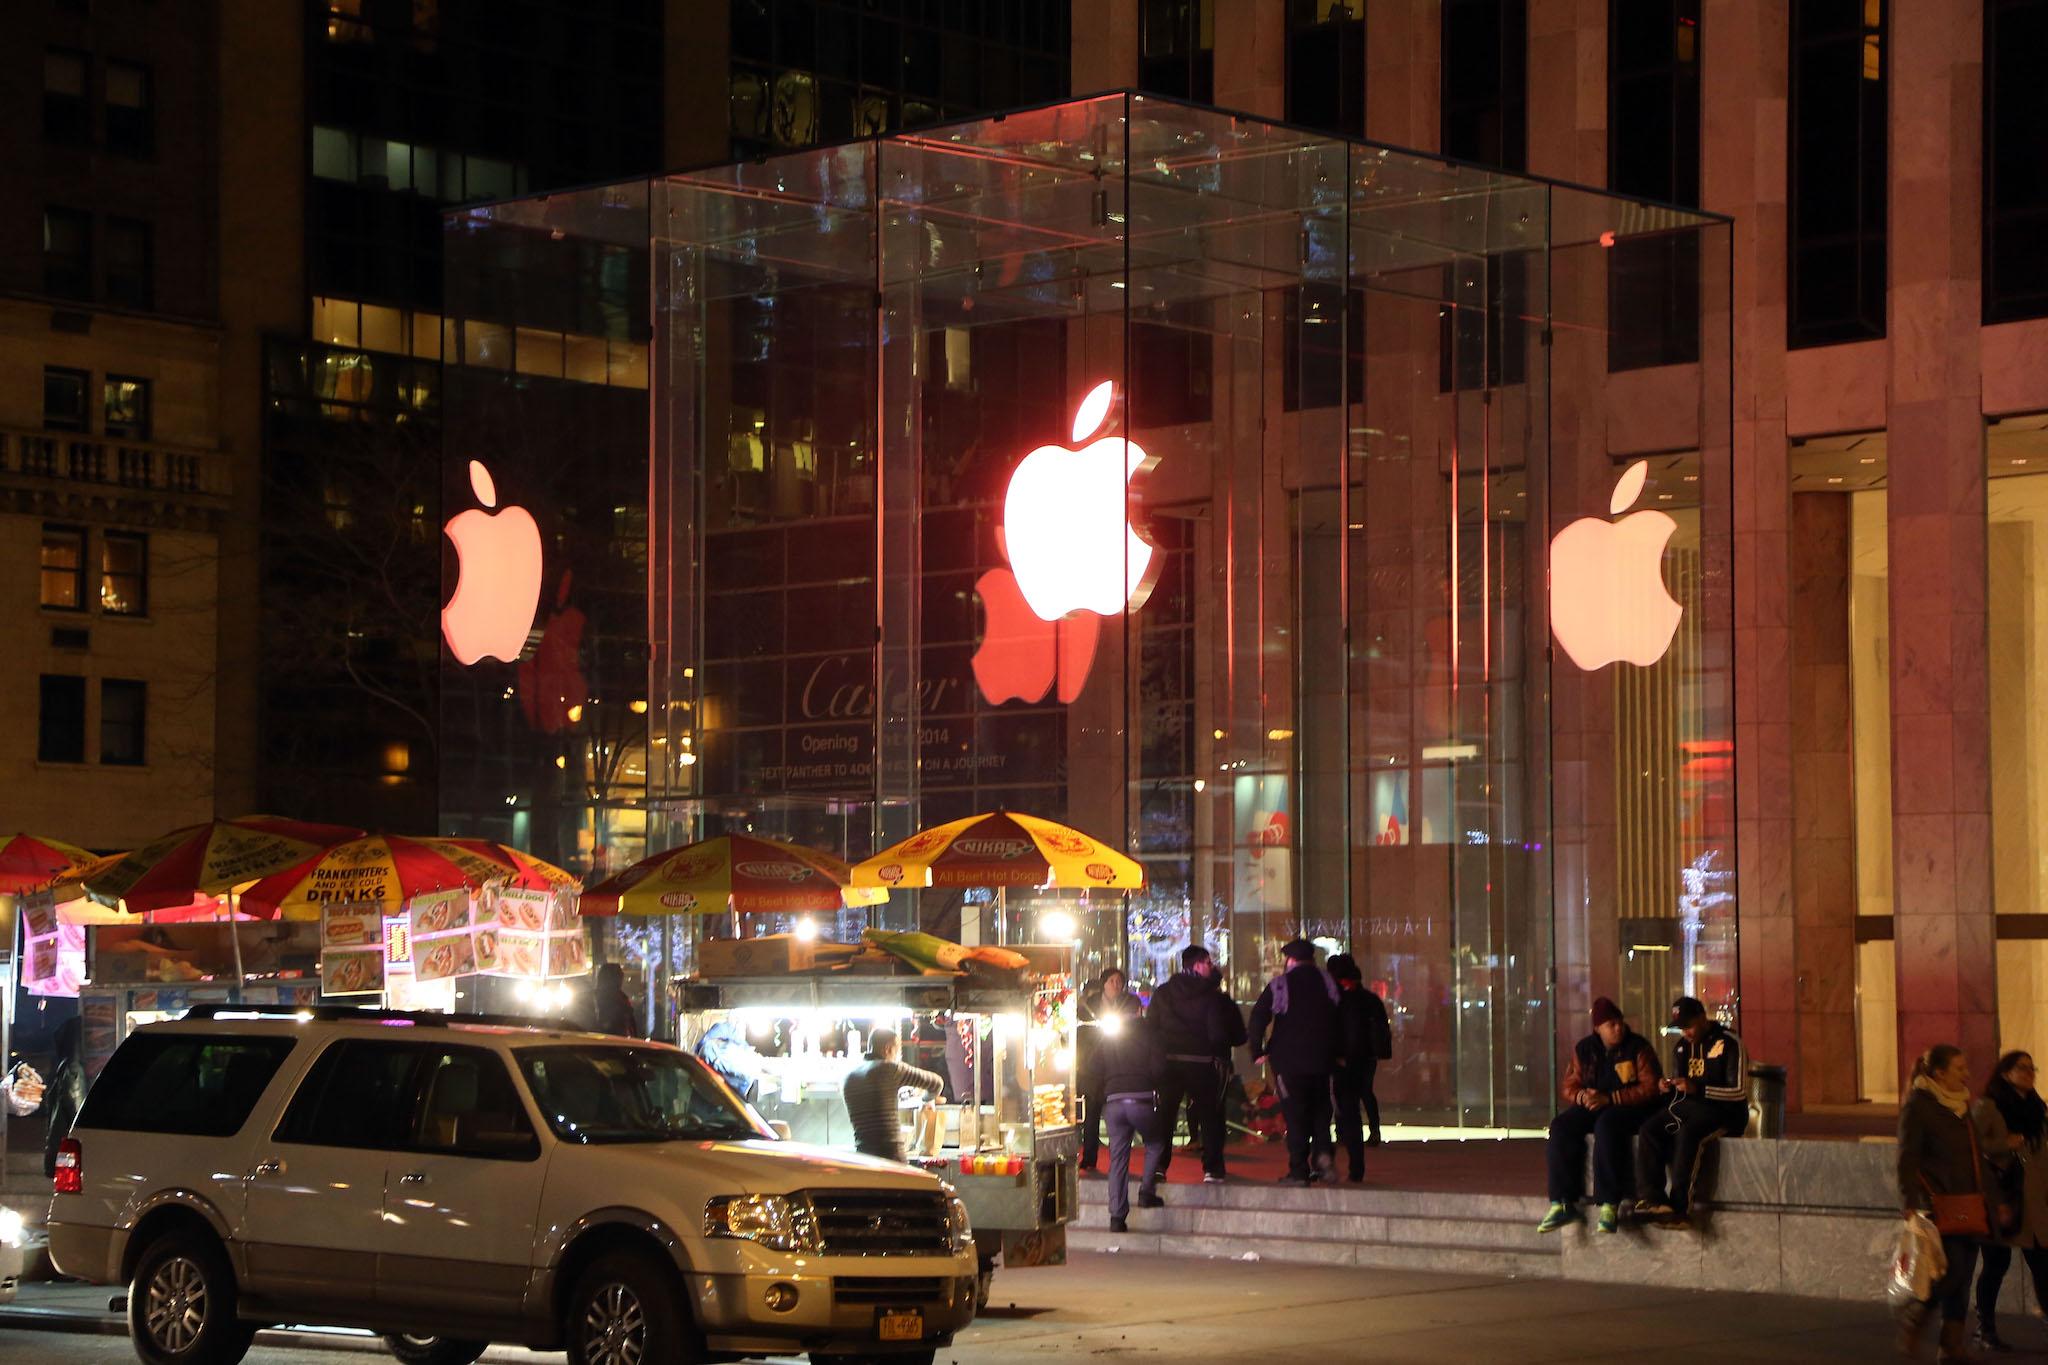 The Apple Store on 5th Avenue as seen during the 25th Annual World AIDS Day on December 1, 2013